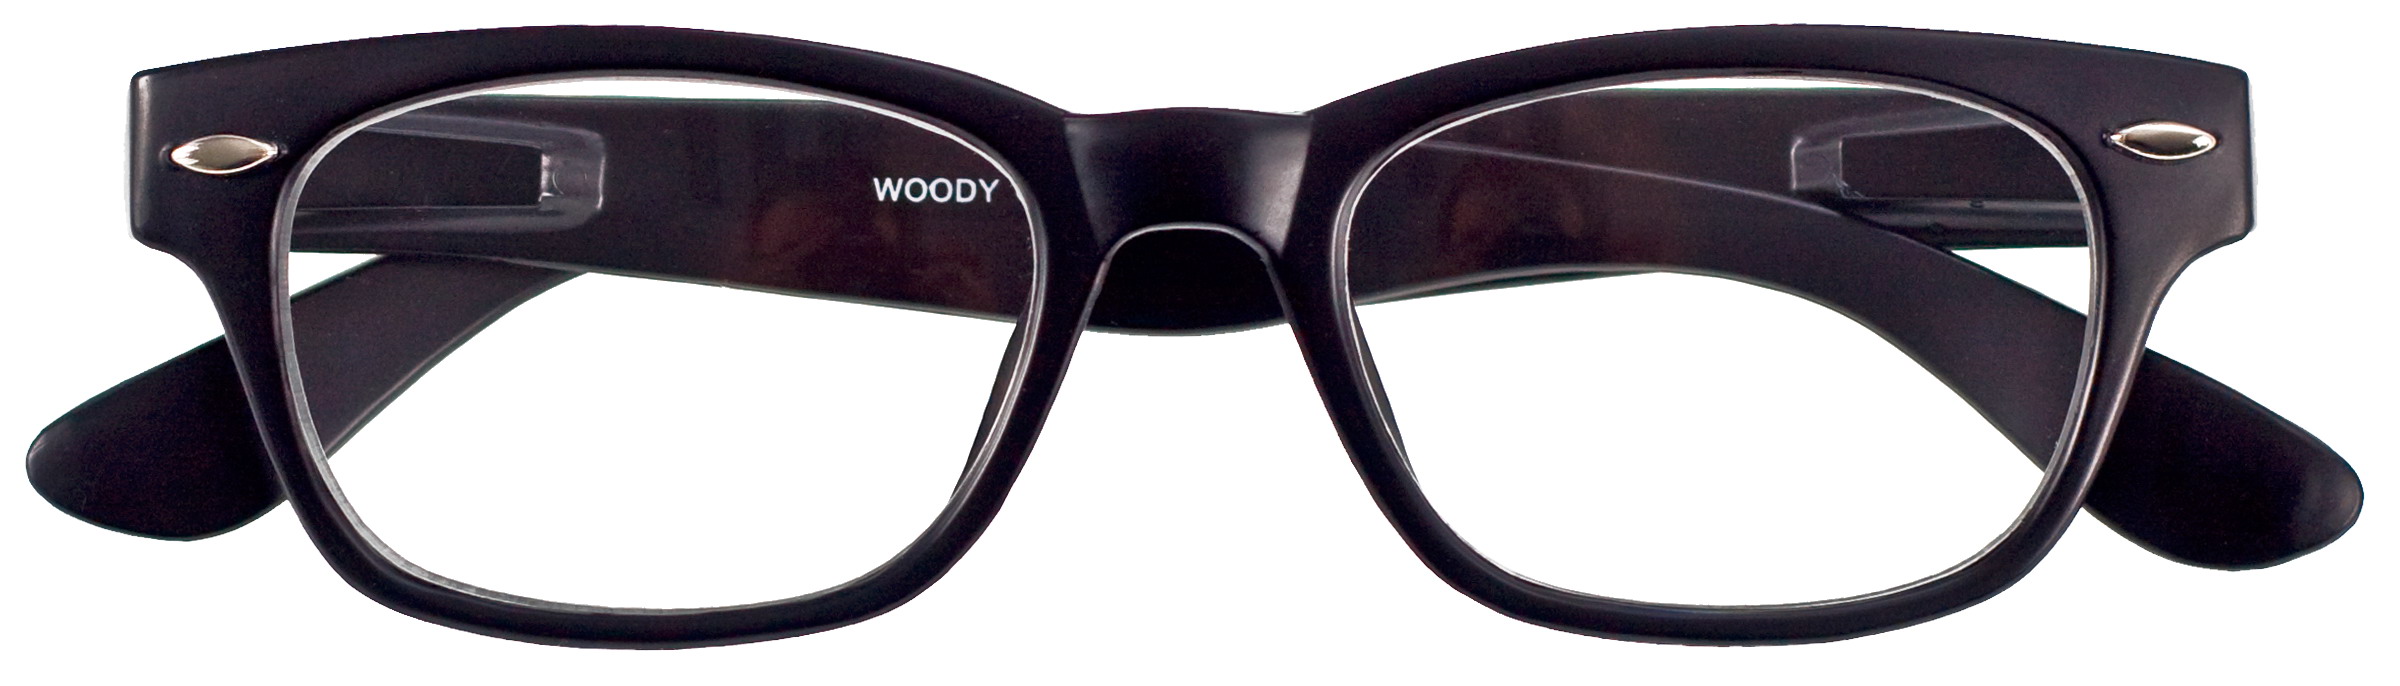 Woody Black Readers by I Need You Readers